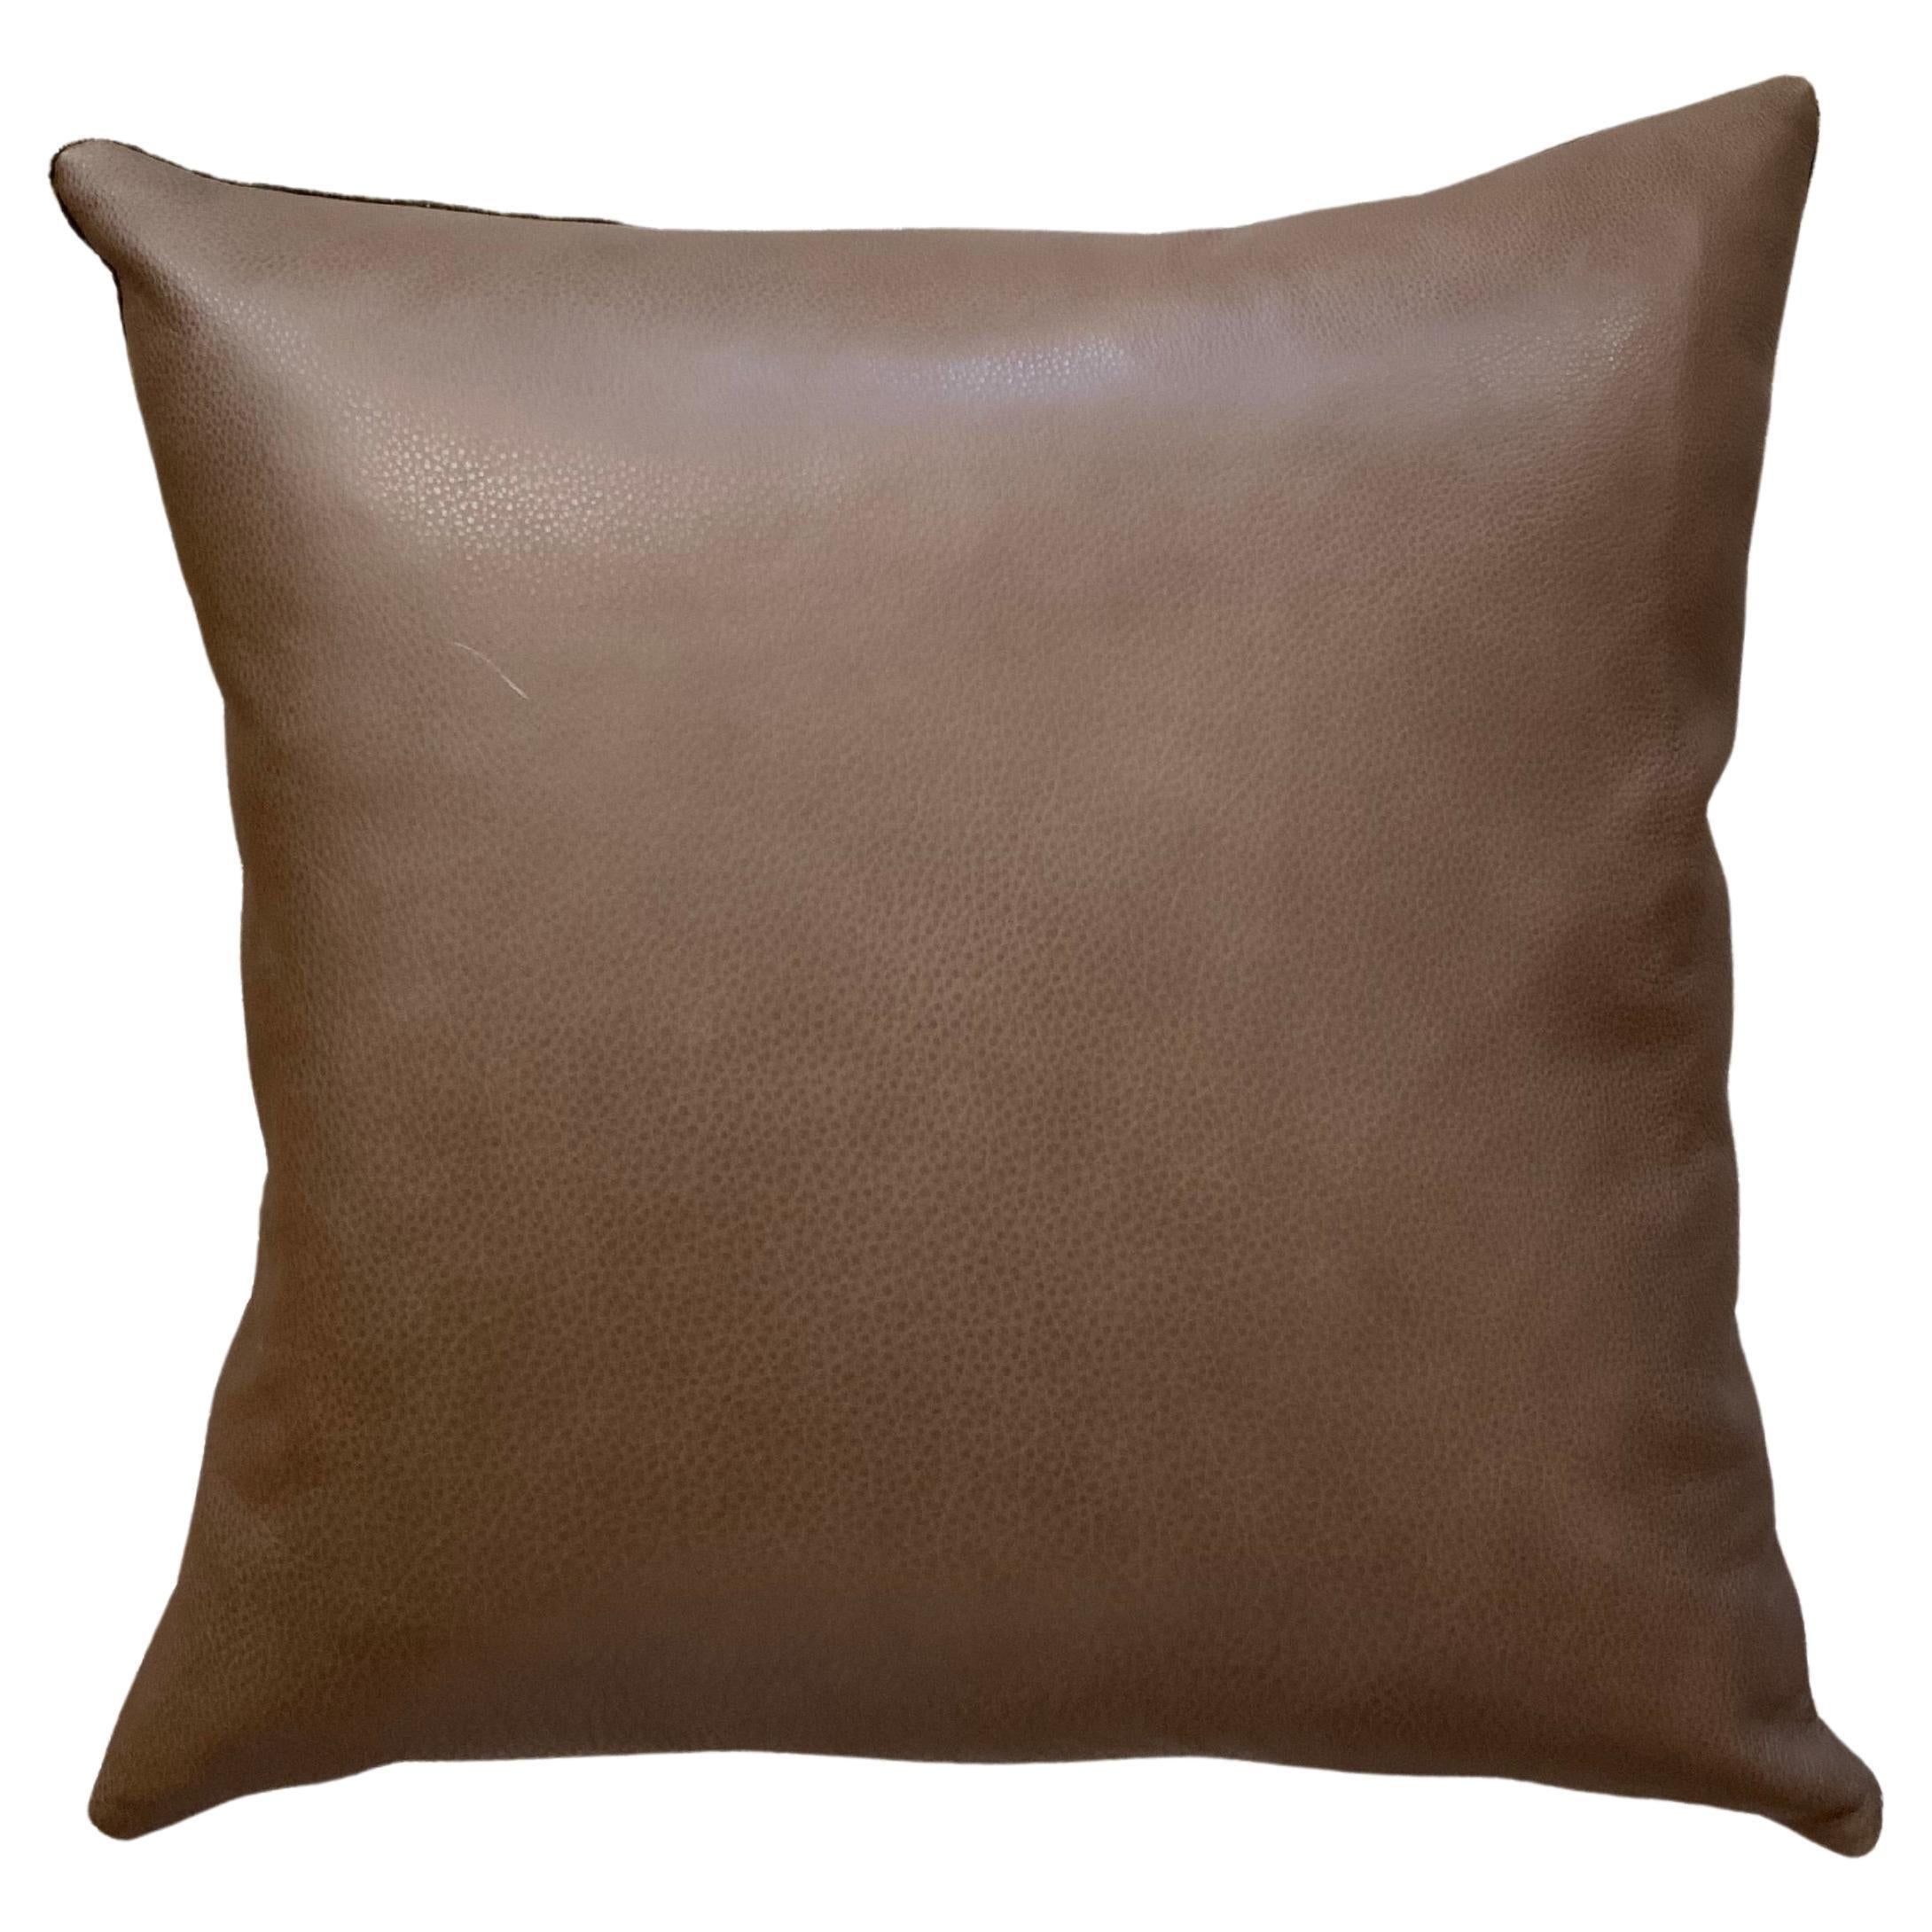 Velvet Fall Sky Pillow with Brown Leather Back #1 In New Condition For Sale In Englewood, CO